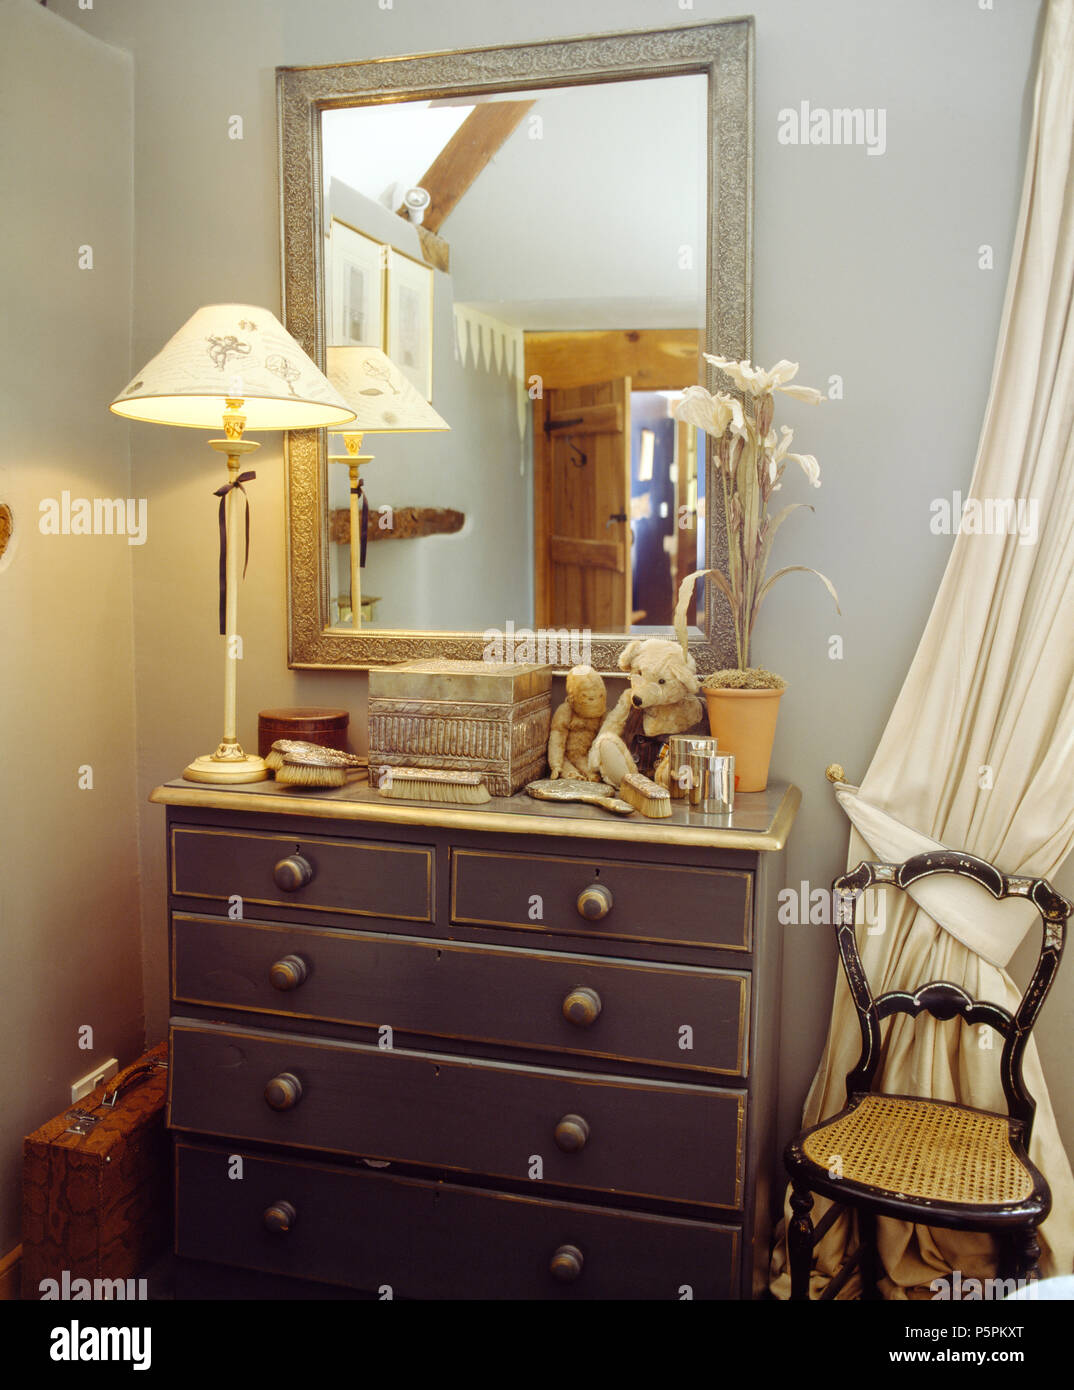 Grey painted mirror above lighted lamp on grey painted chest-of-drawers Stock Photo